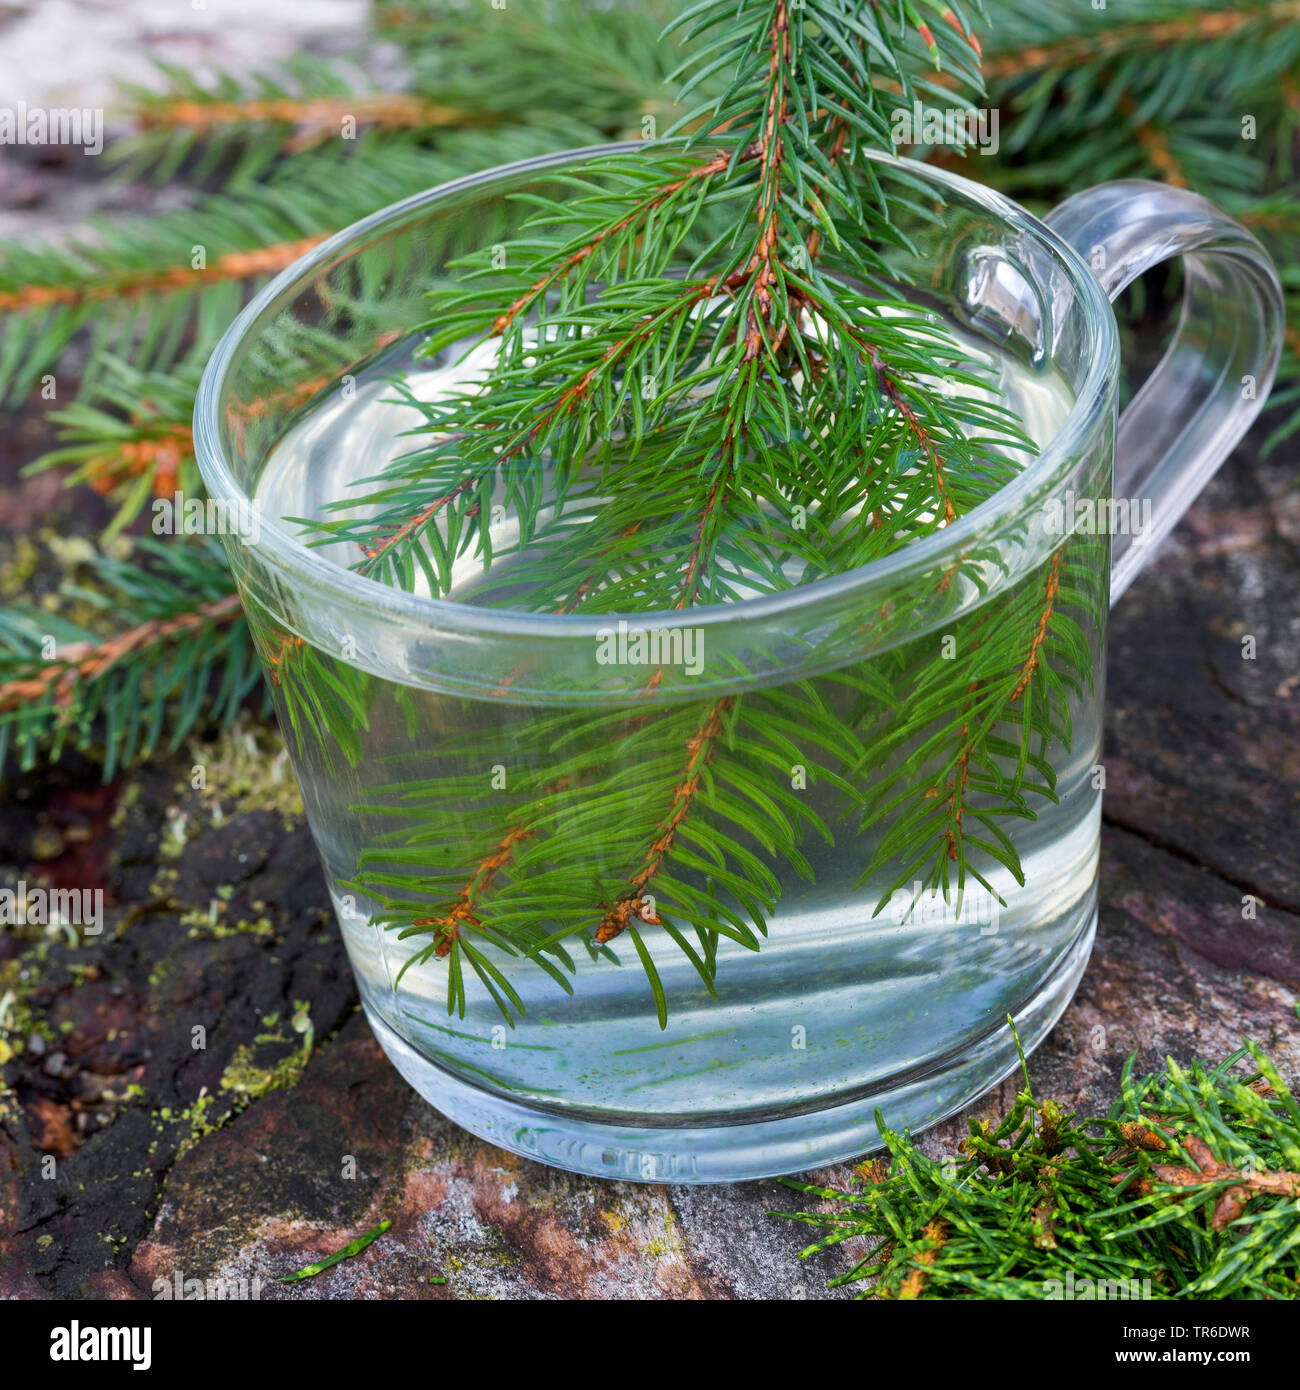 Norway spruce (Picea abies), tree from spruce needle, Germany Stock Photo